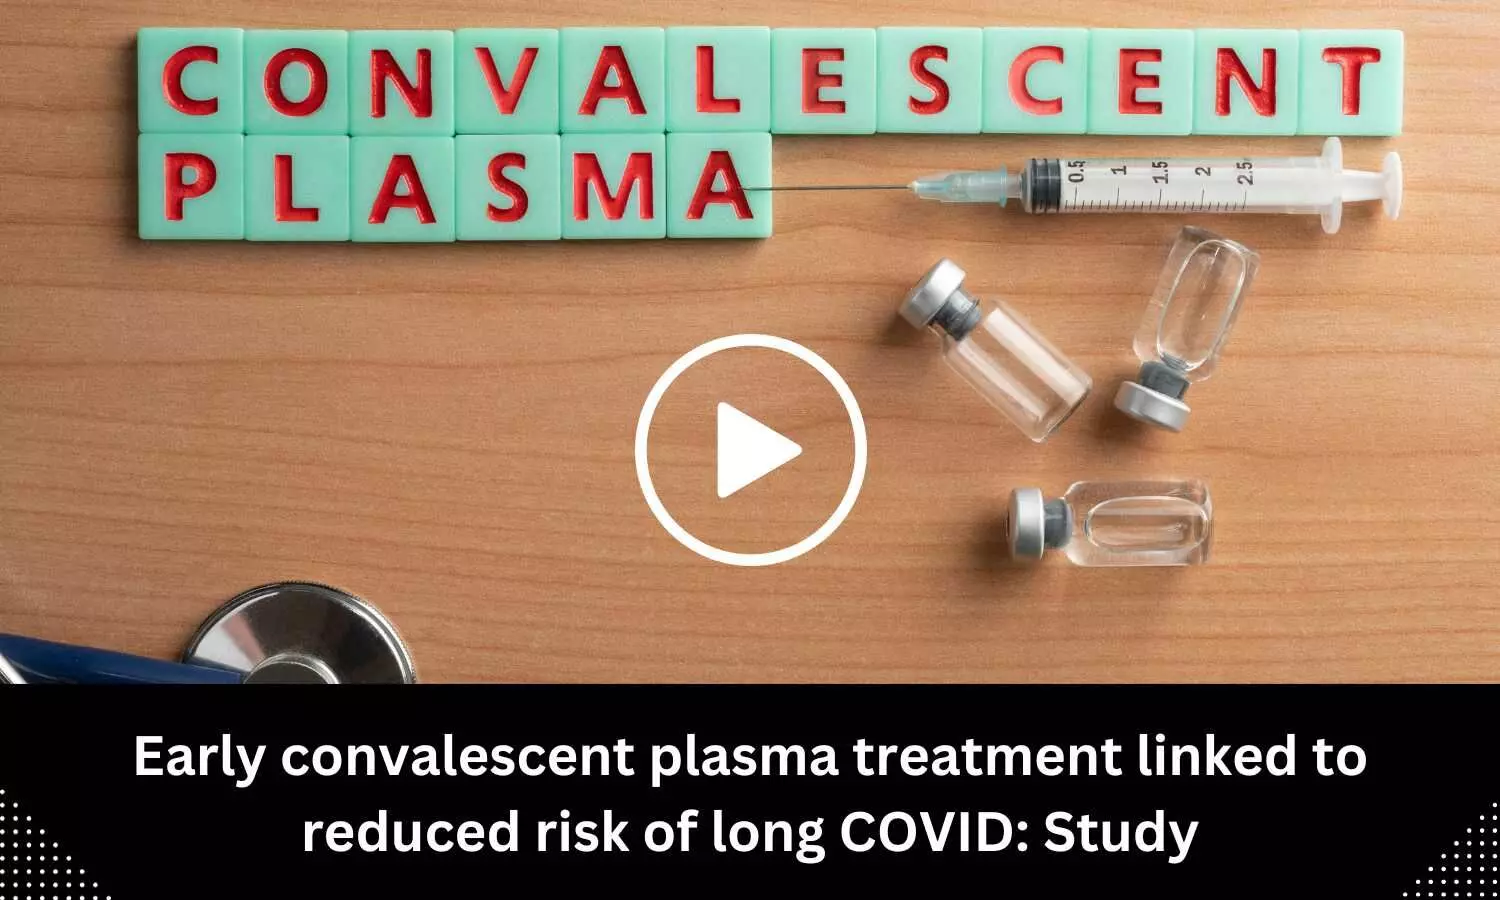 Early convalescent plasma treatment linked to reduced risk of long COVID: Study